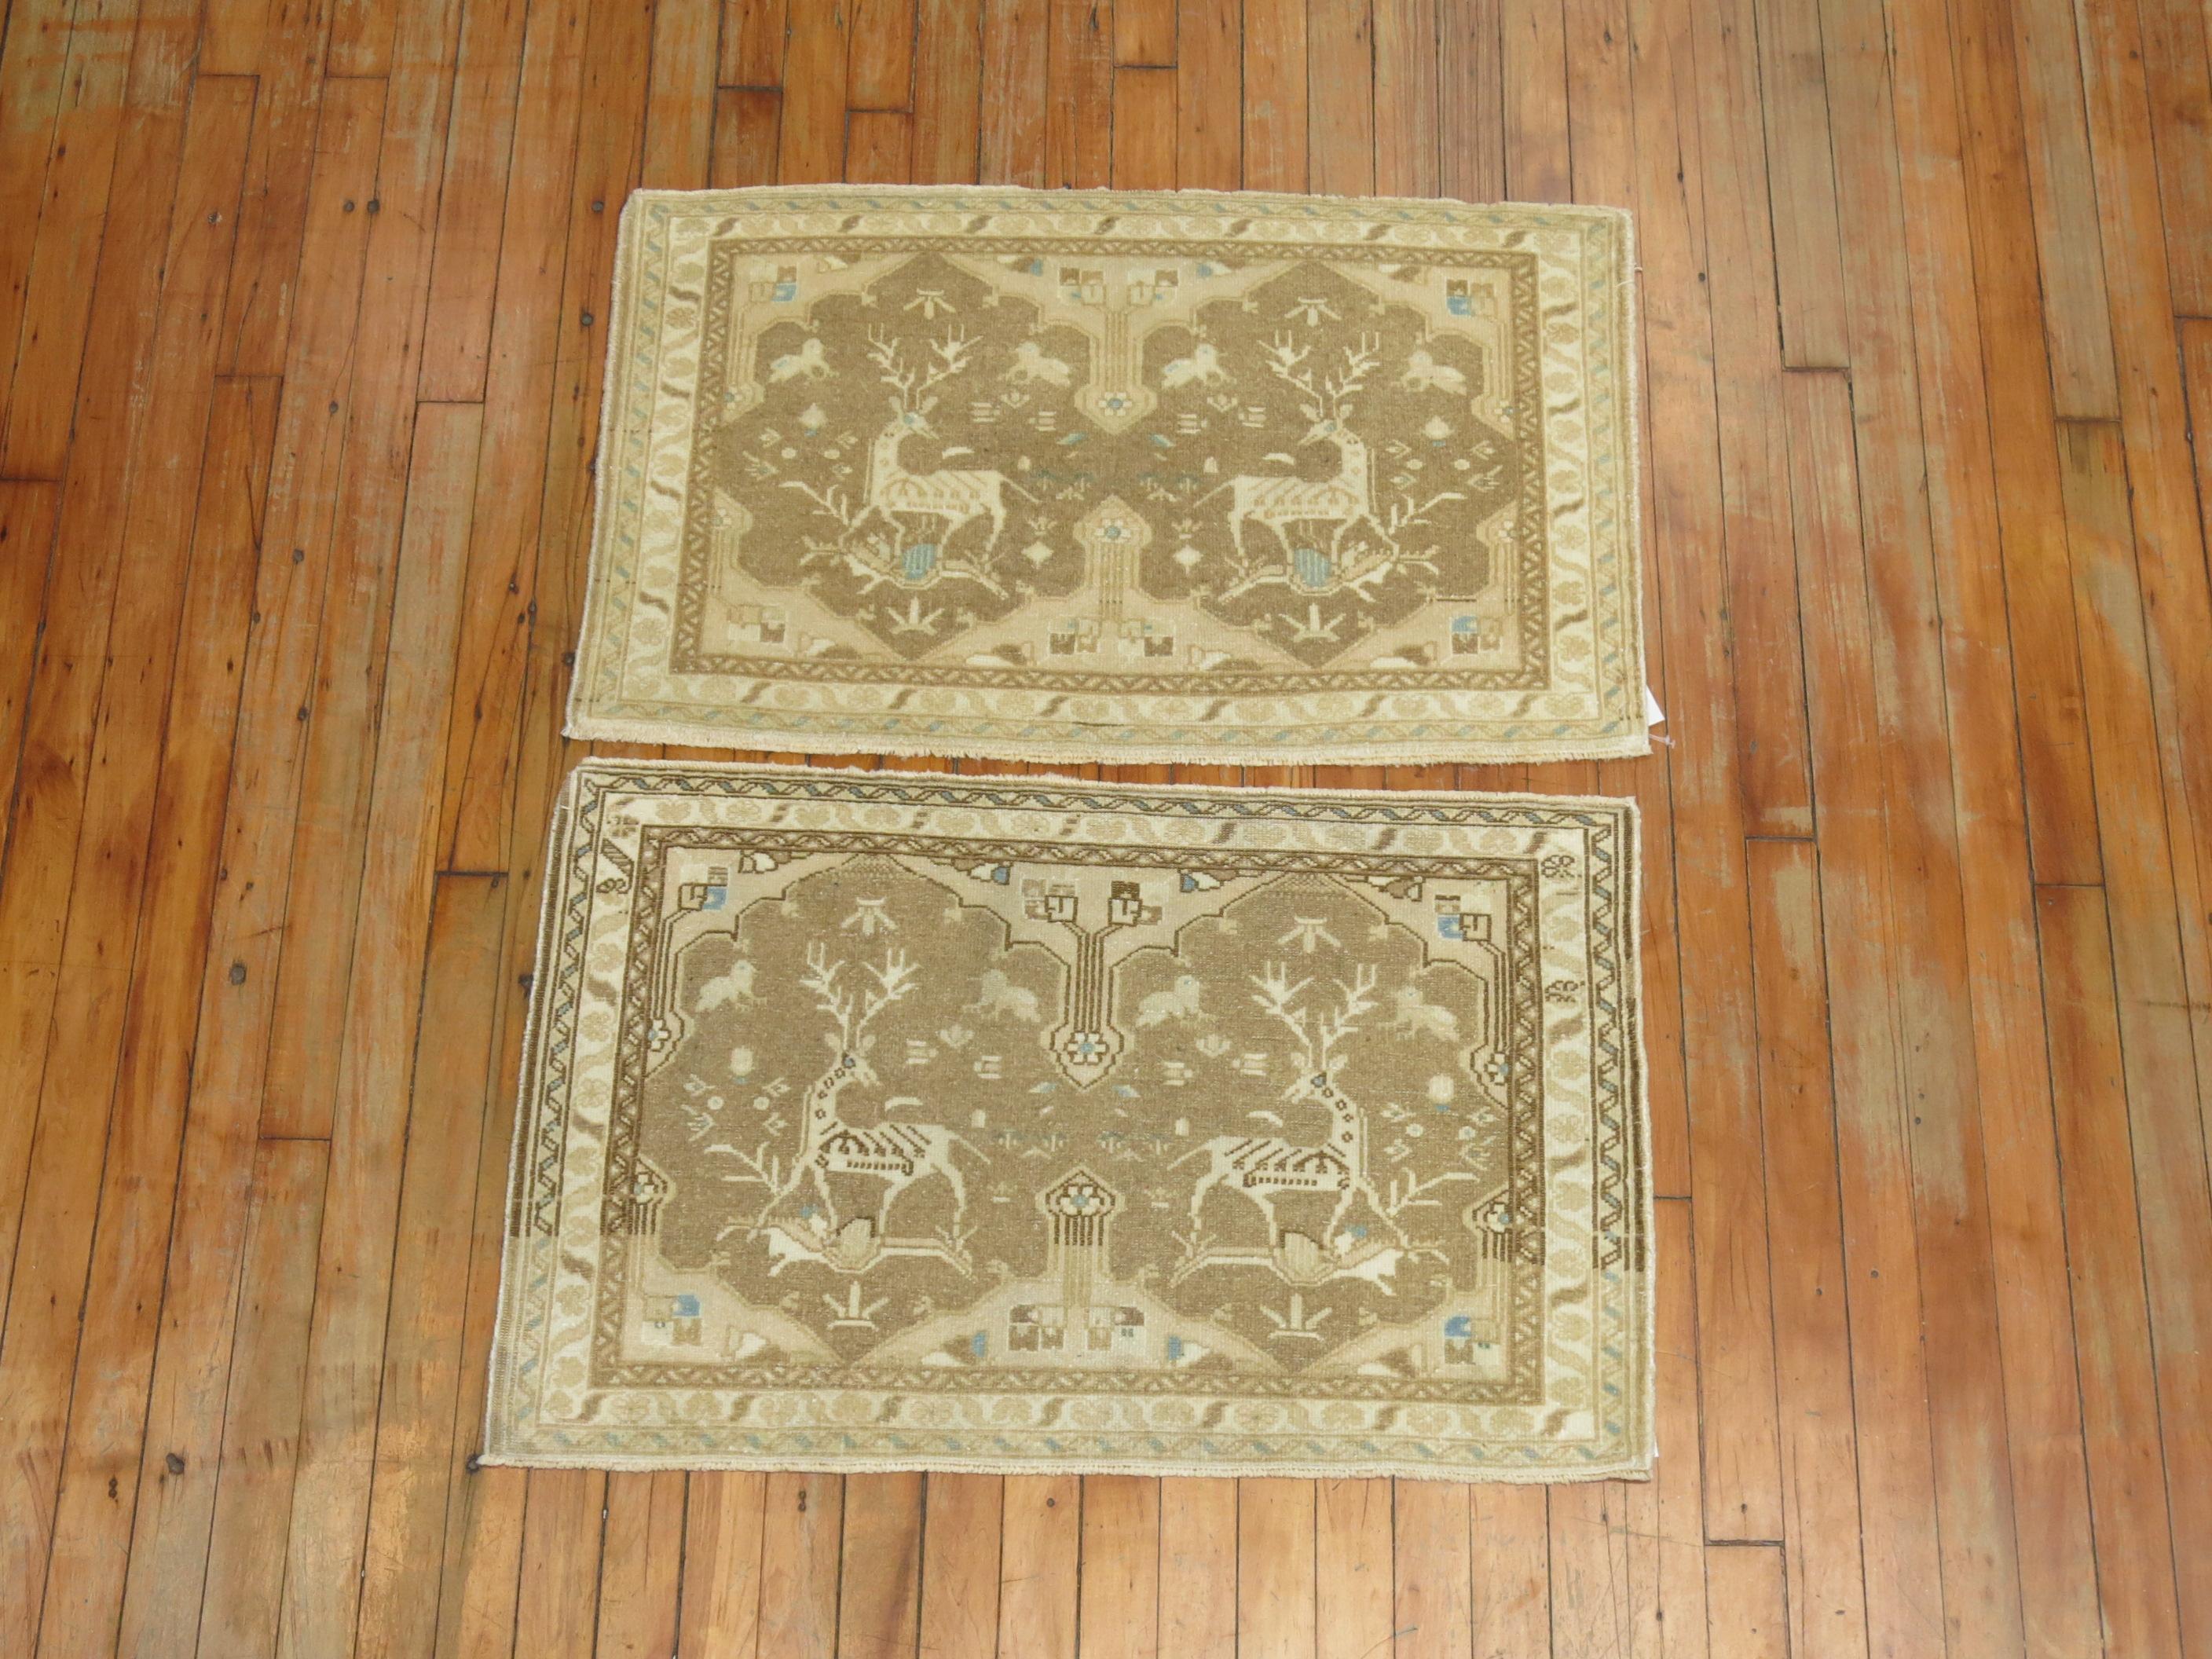 A pair of neutral Persian Tabriz rugs from the mid-20th century with a set of reindeer's staring at each other,

Measuring 21'' x 34'' respectively.
 